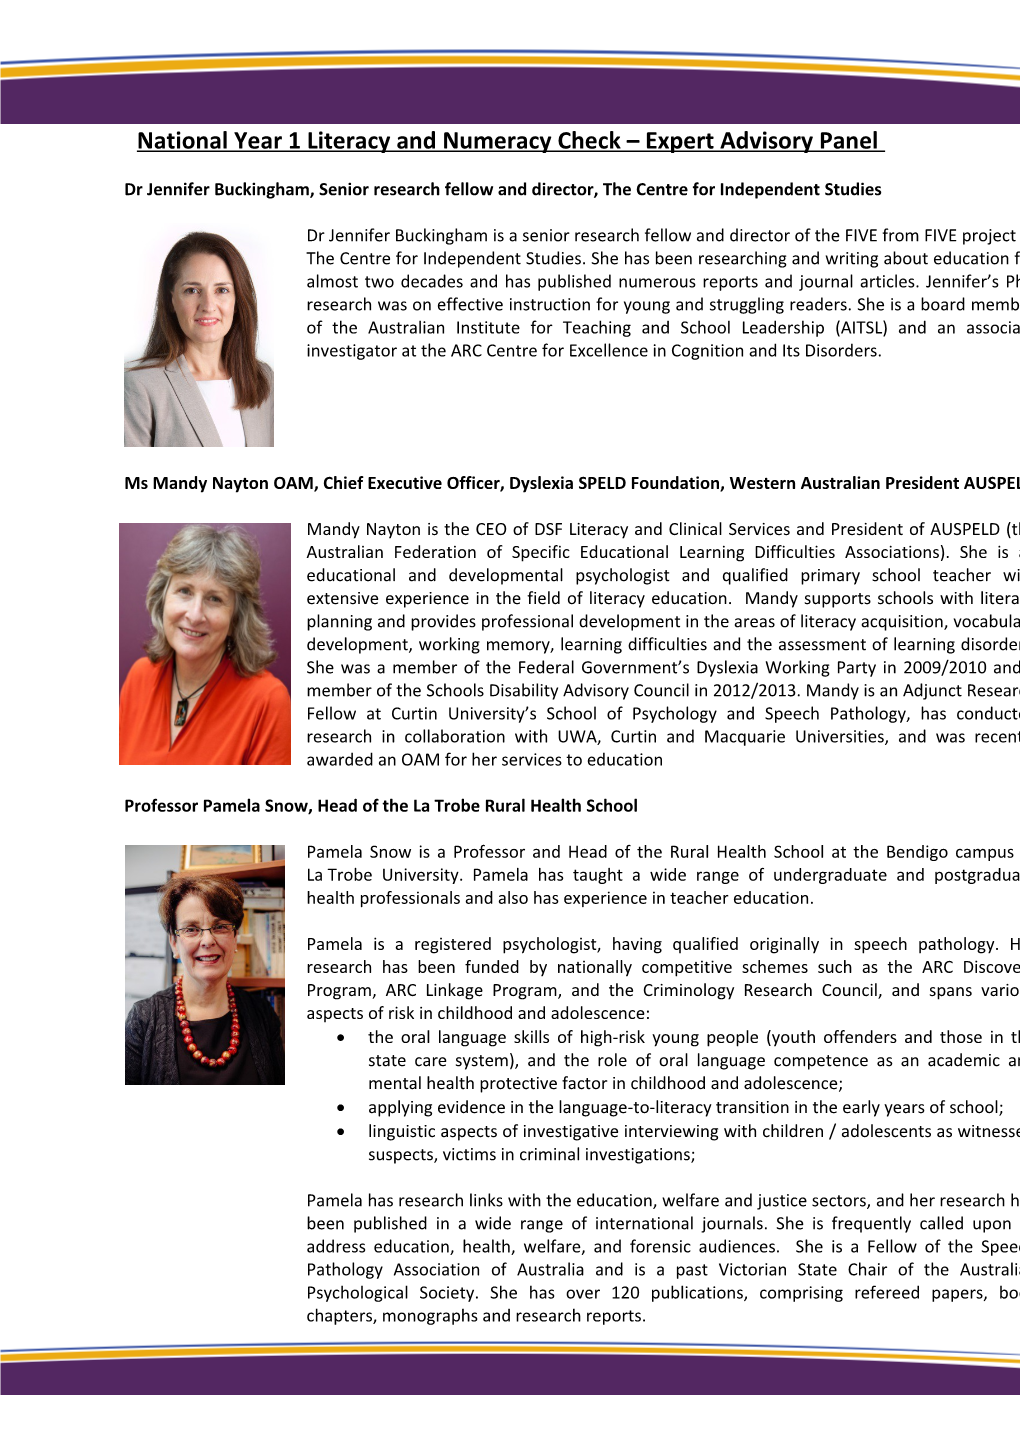 National Year 1 Literacy and Numeracy Check Expert Advisory Panel